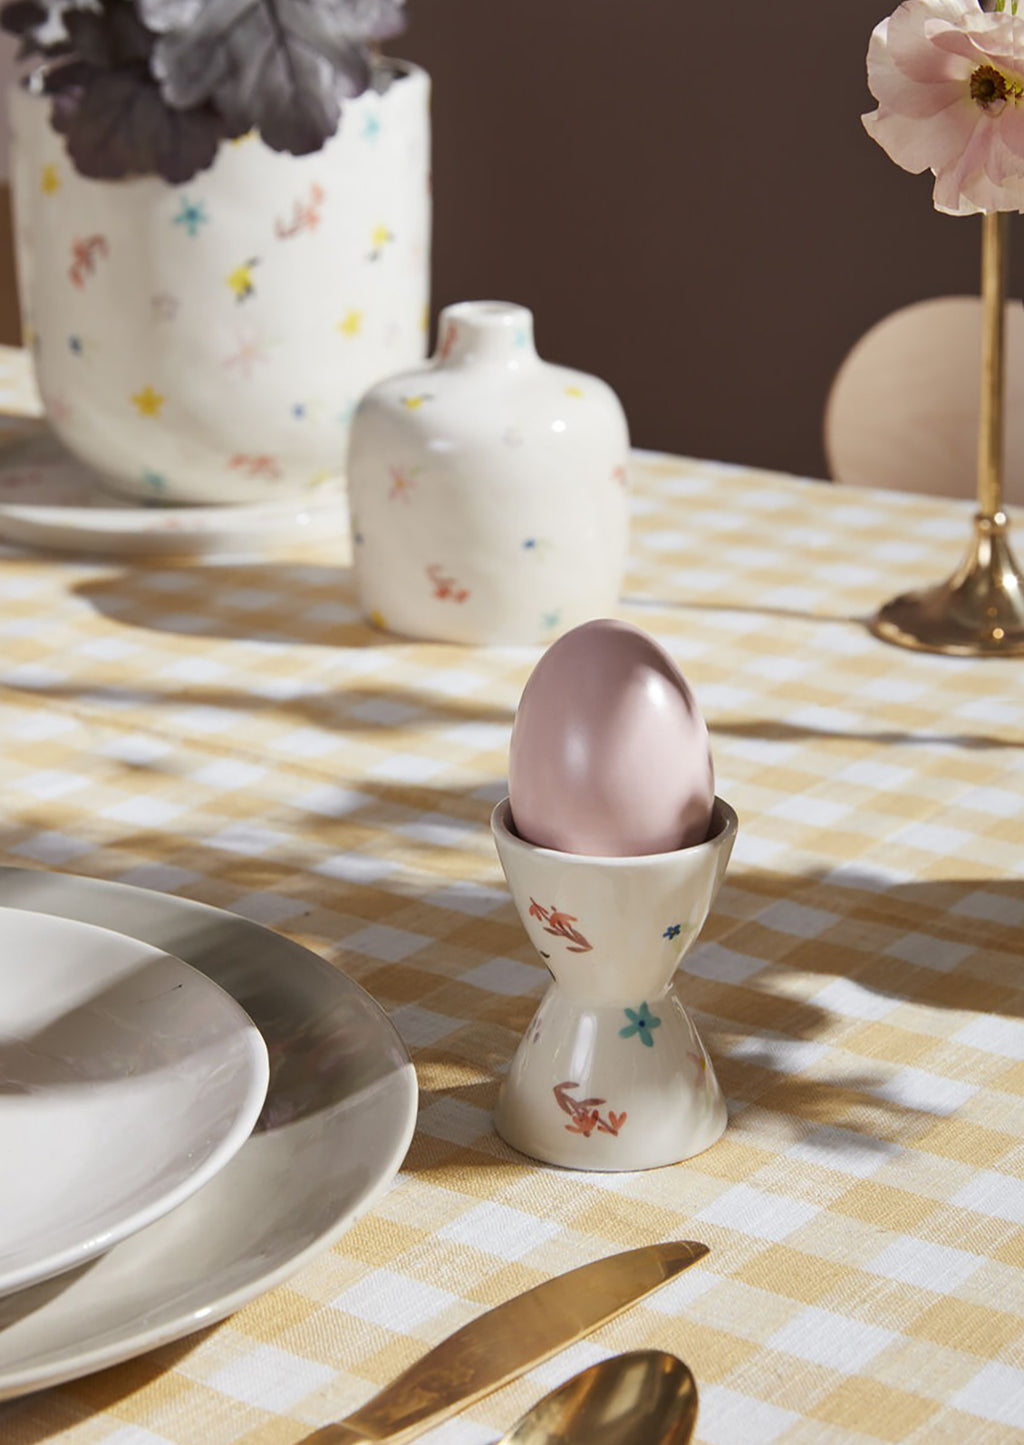 2: A white egg cup with pastel floral pattern.